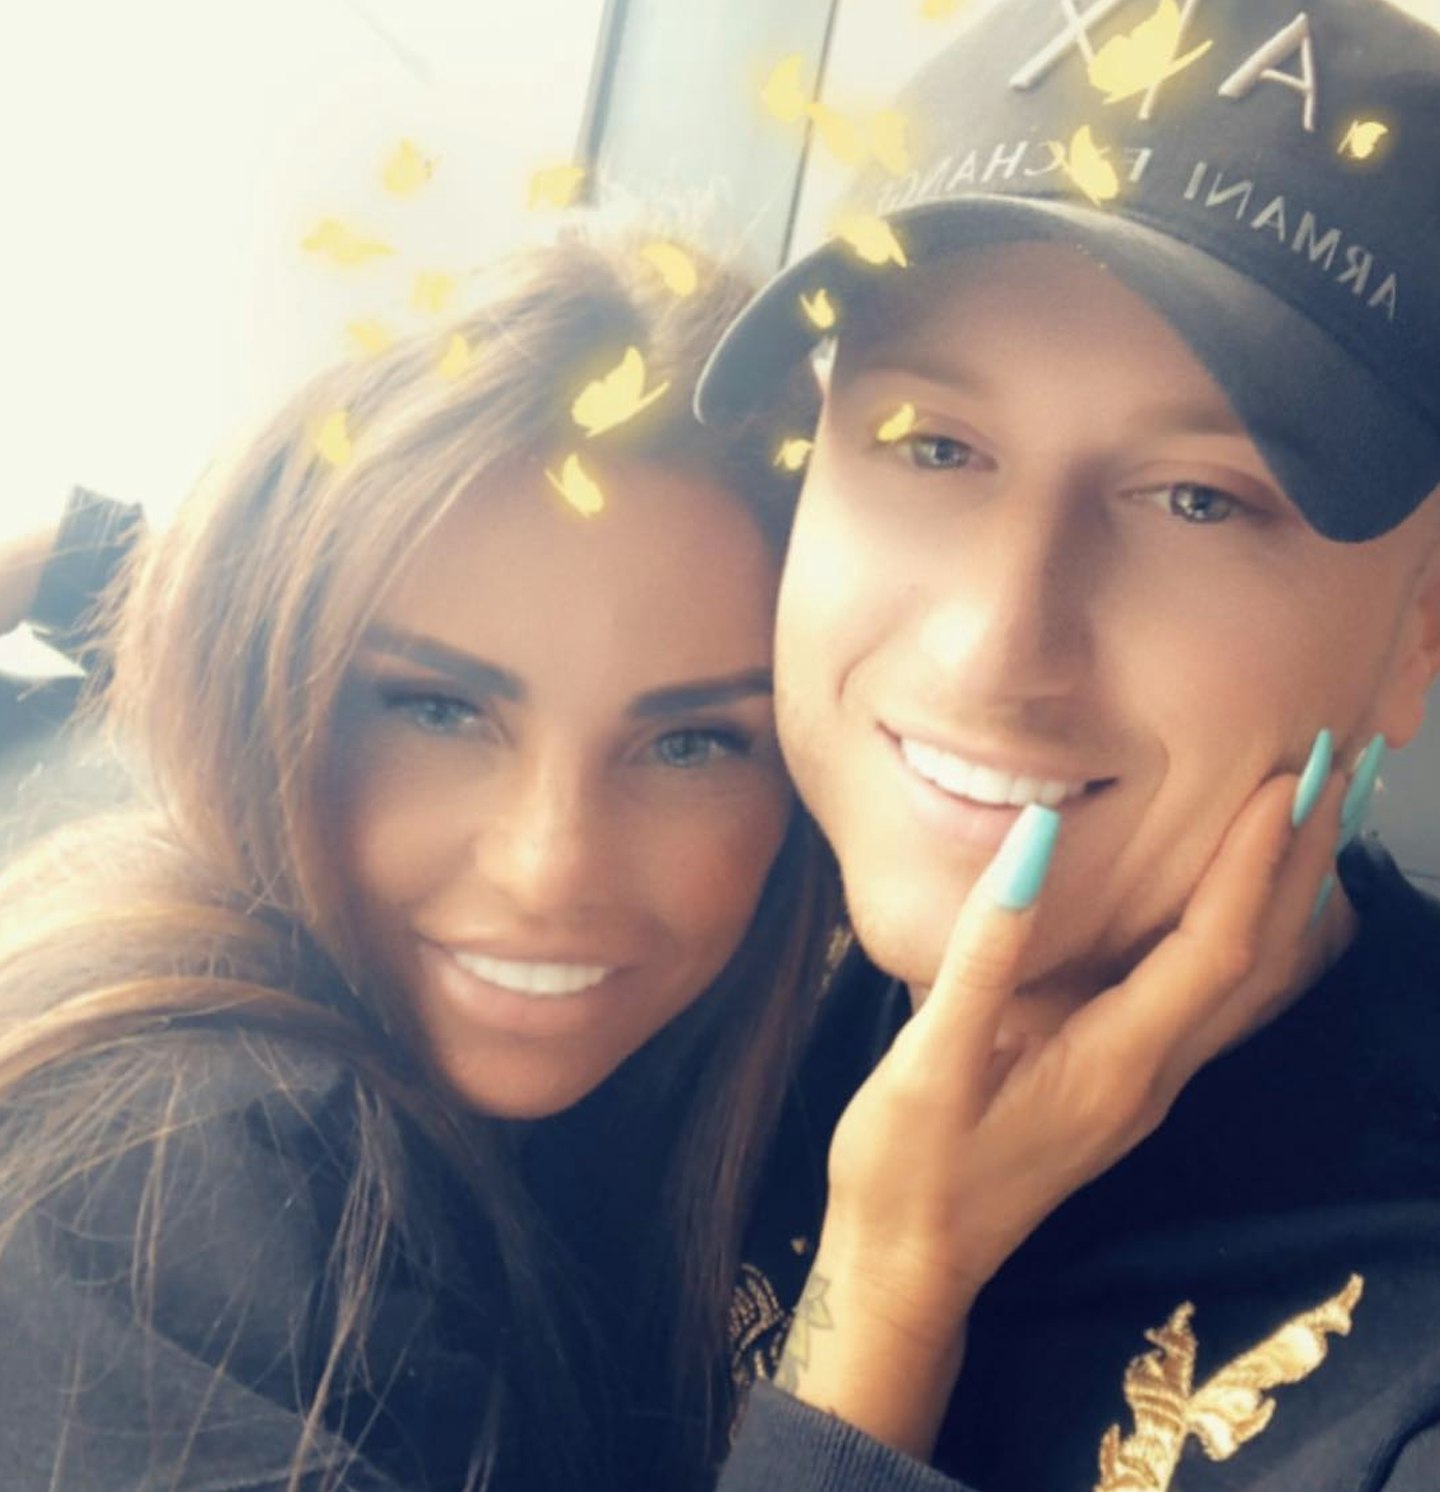 Katie Price and Kris Boyson together